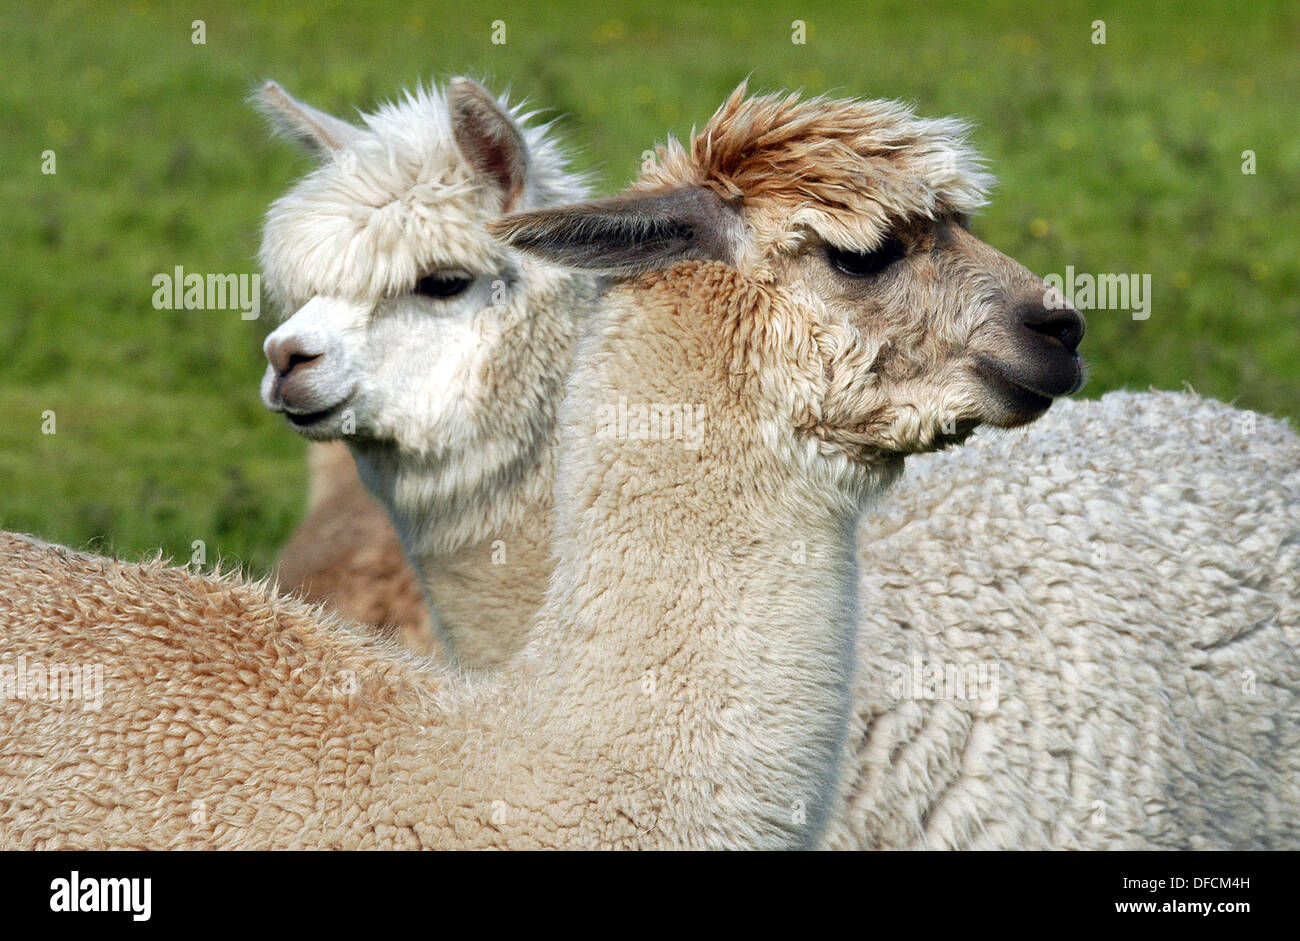 Alpaca, a domesticated South American mammal related to the Llama. Stock Photo